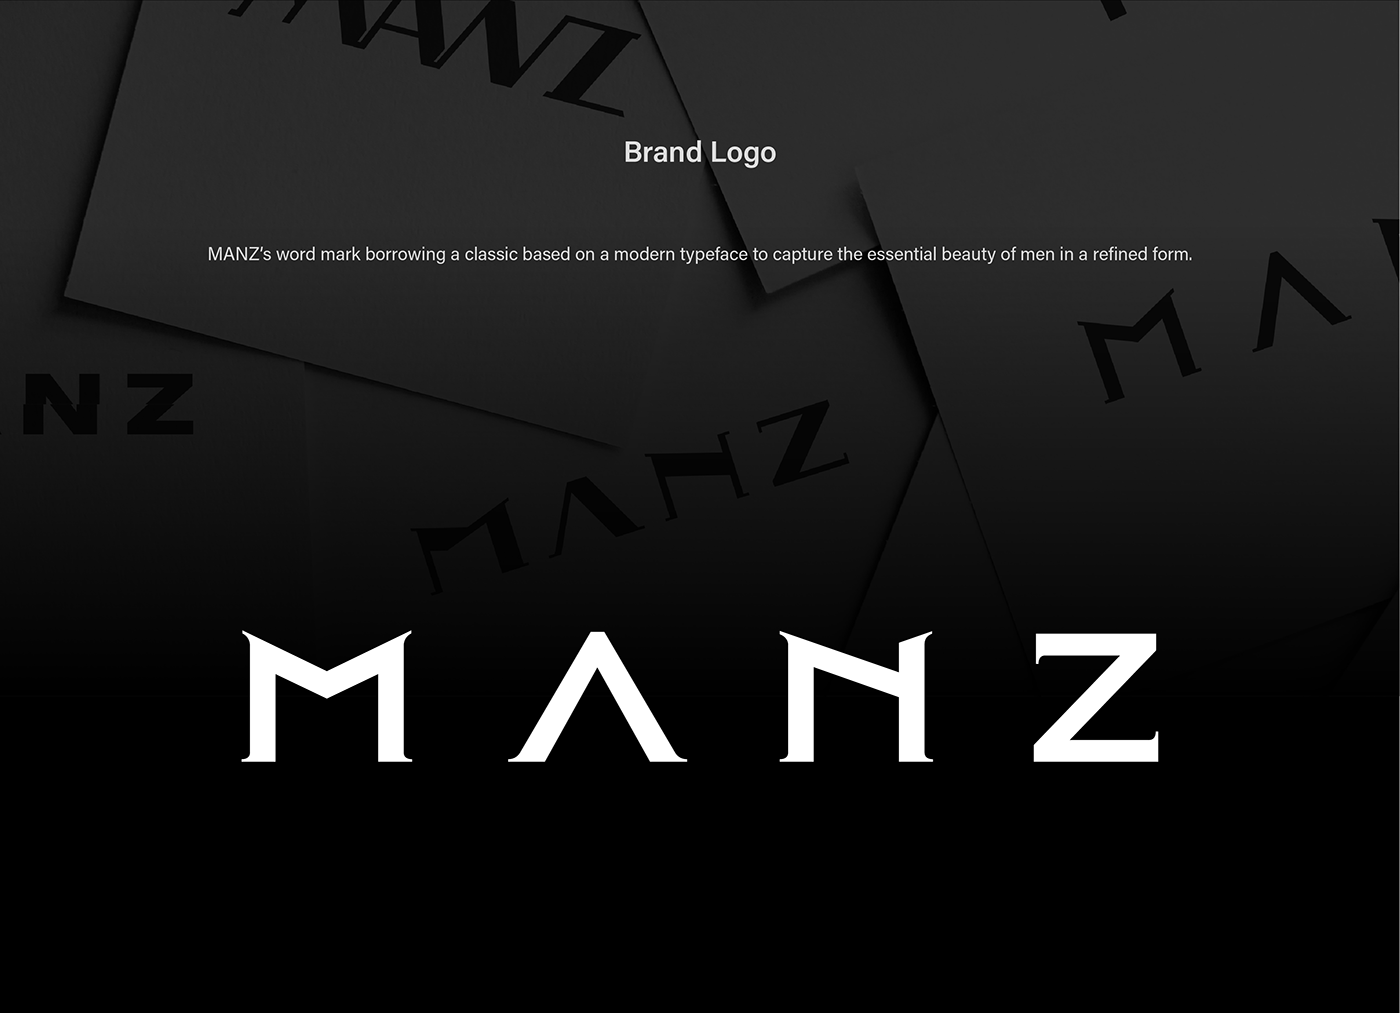 diffuser Fragrance Home Care man Manz perfume scent package Brand Design statue